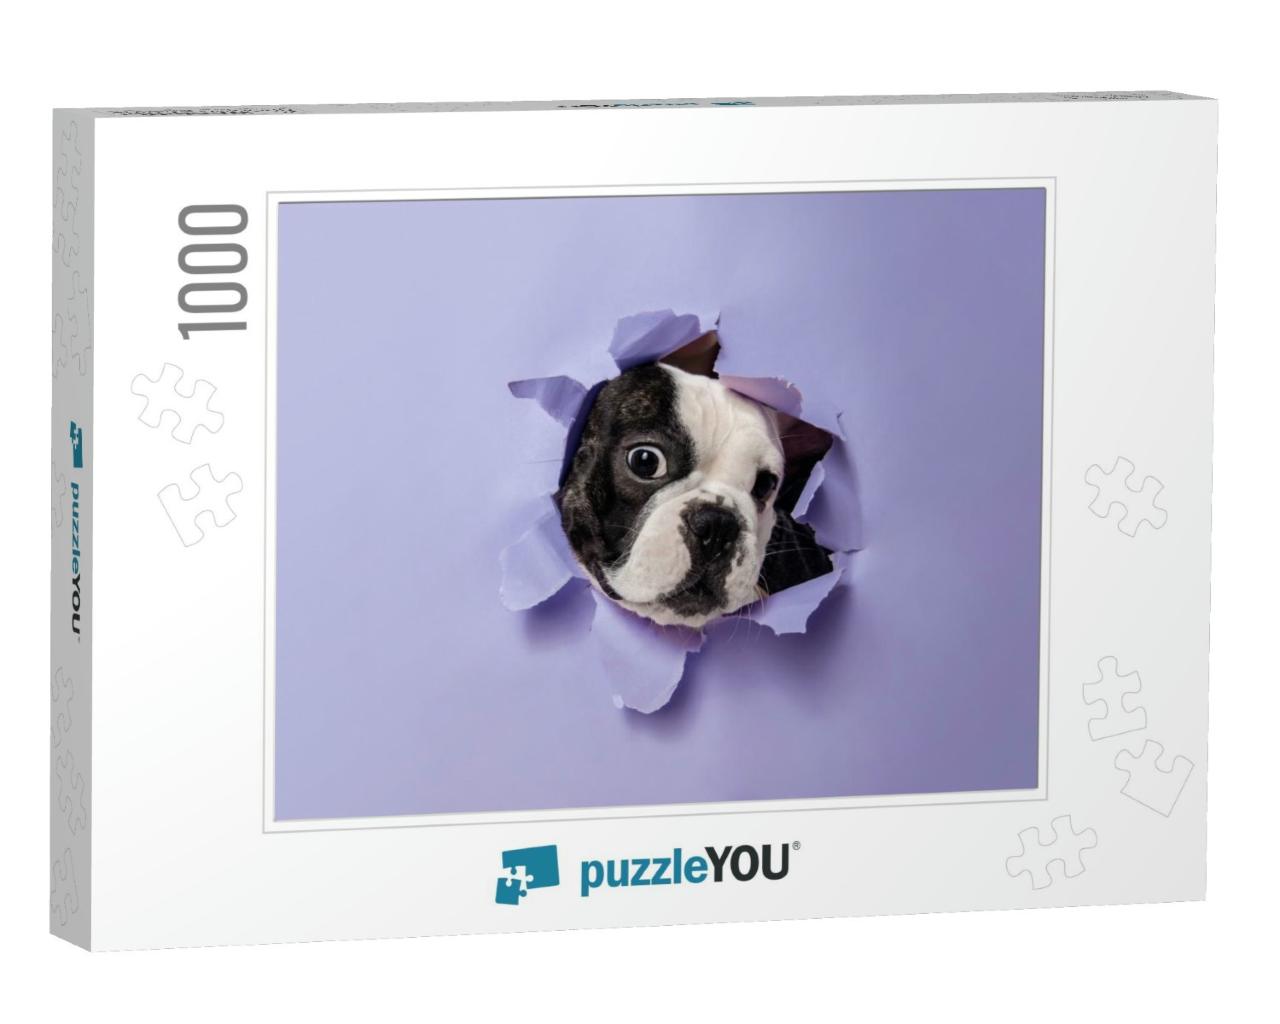 Break Through. French Bulldog Young Dog is Posing. Cute P... Jigsaw Puzzle with 1000 pieces